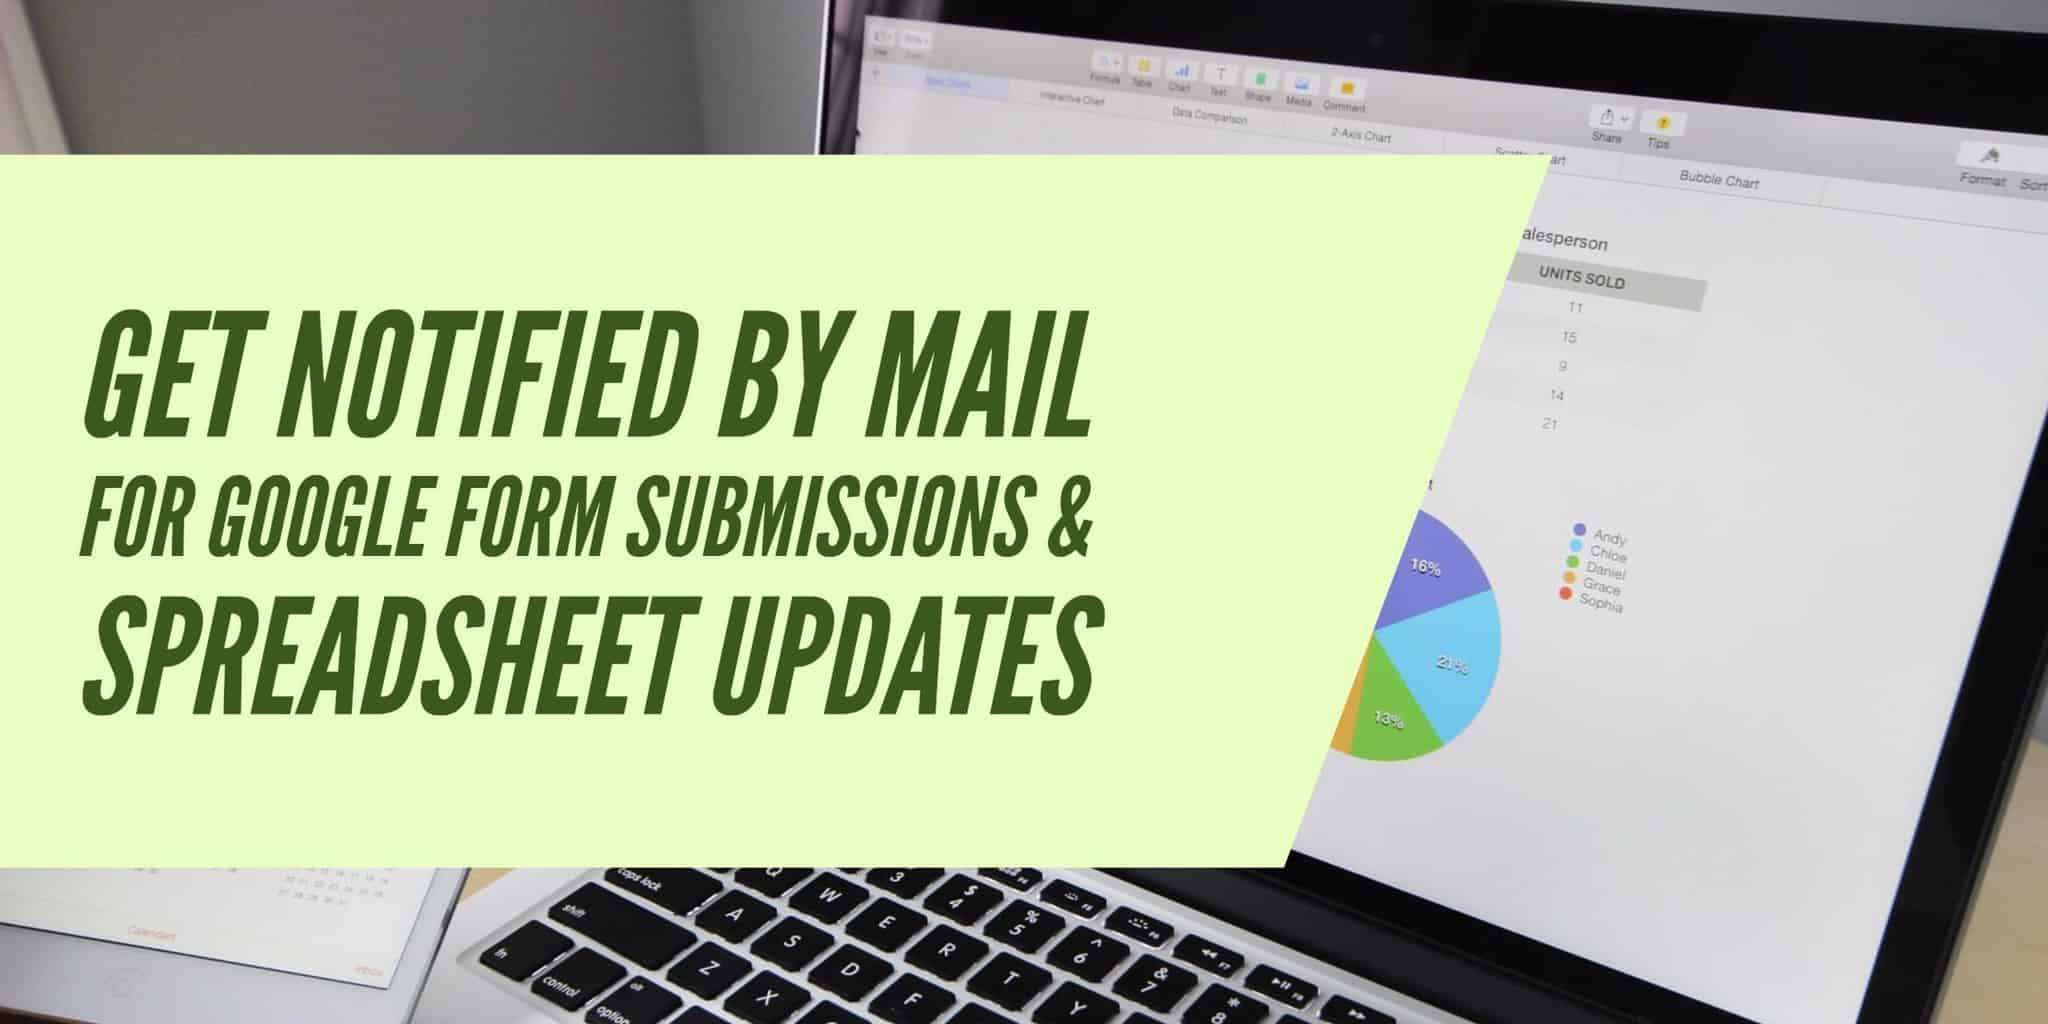 Get notified by mail for Google Form submissions & Spreadsheet updates